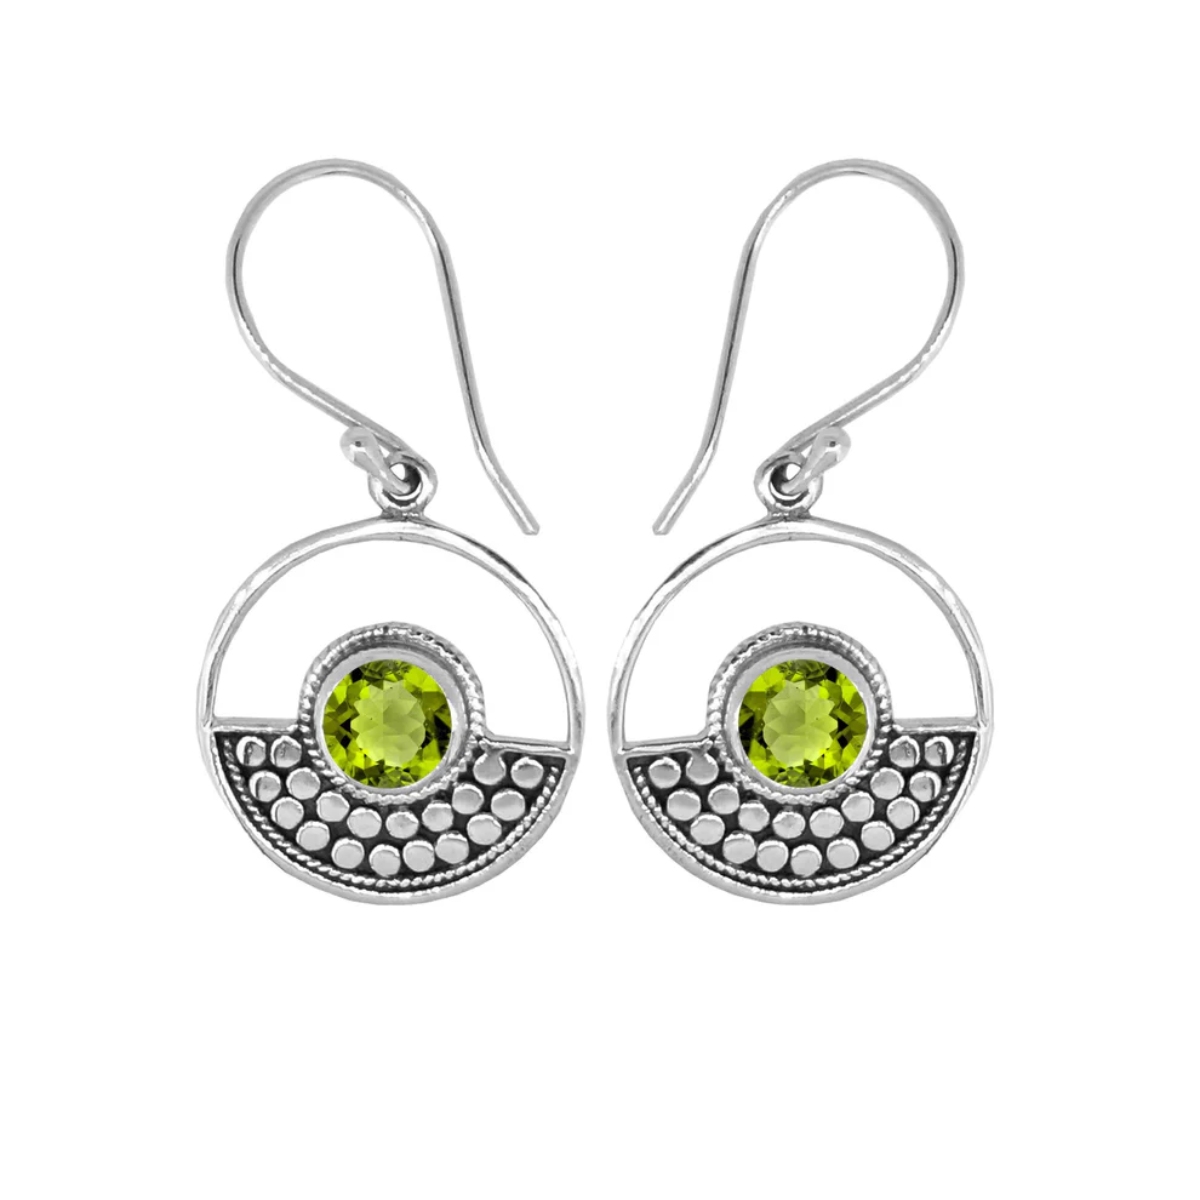 Sterling Silver design in a circle surrounds a circular peridot stone on ear wires. Half of the circle is dotted with an oxidized sterling design, the other half is open.